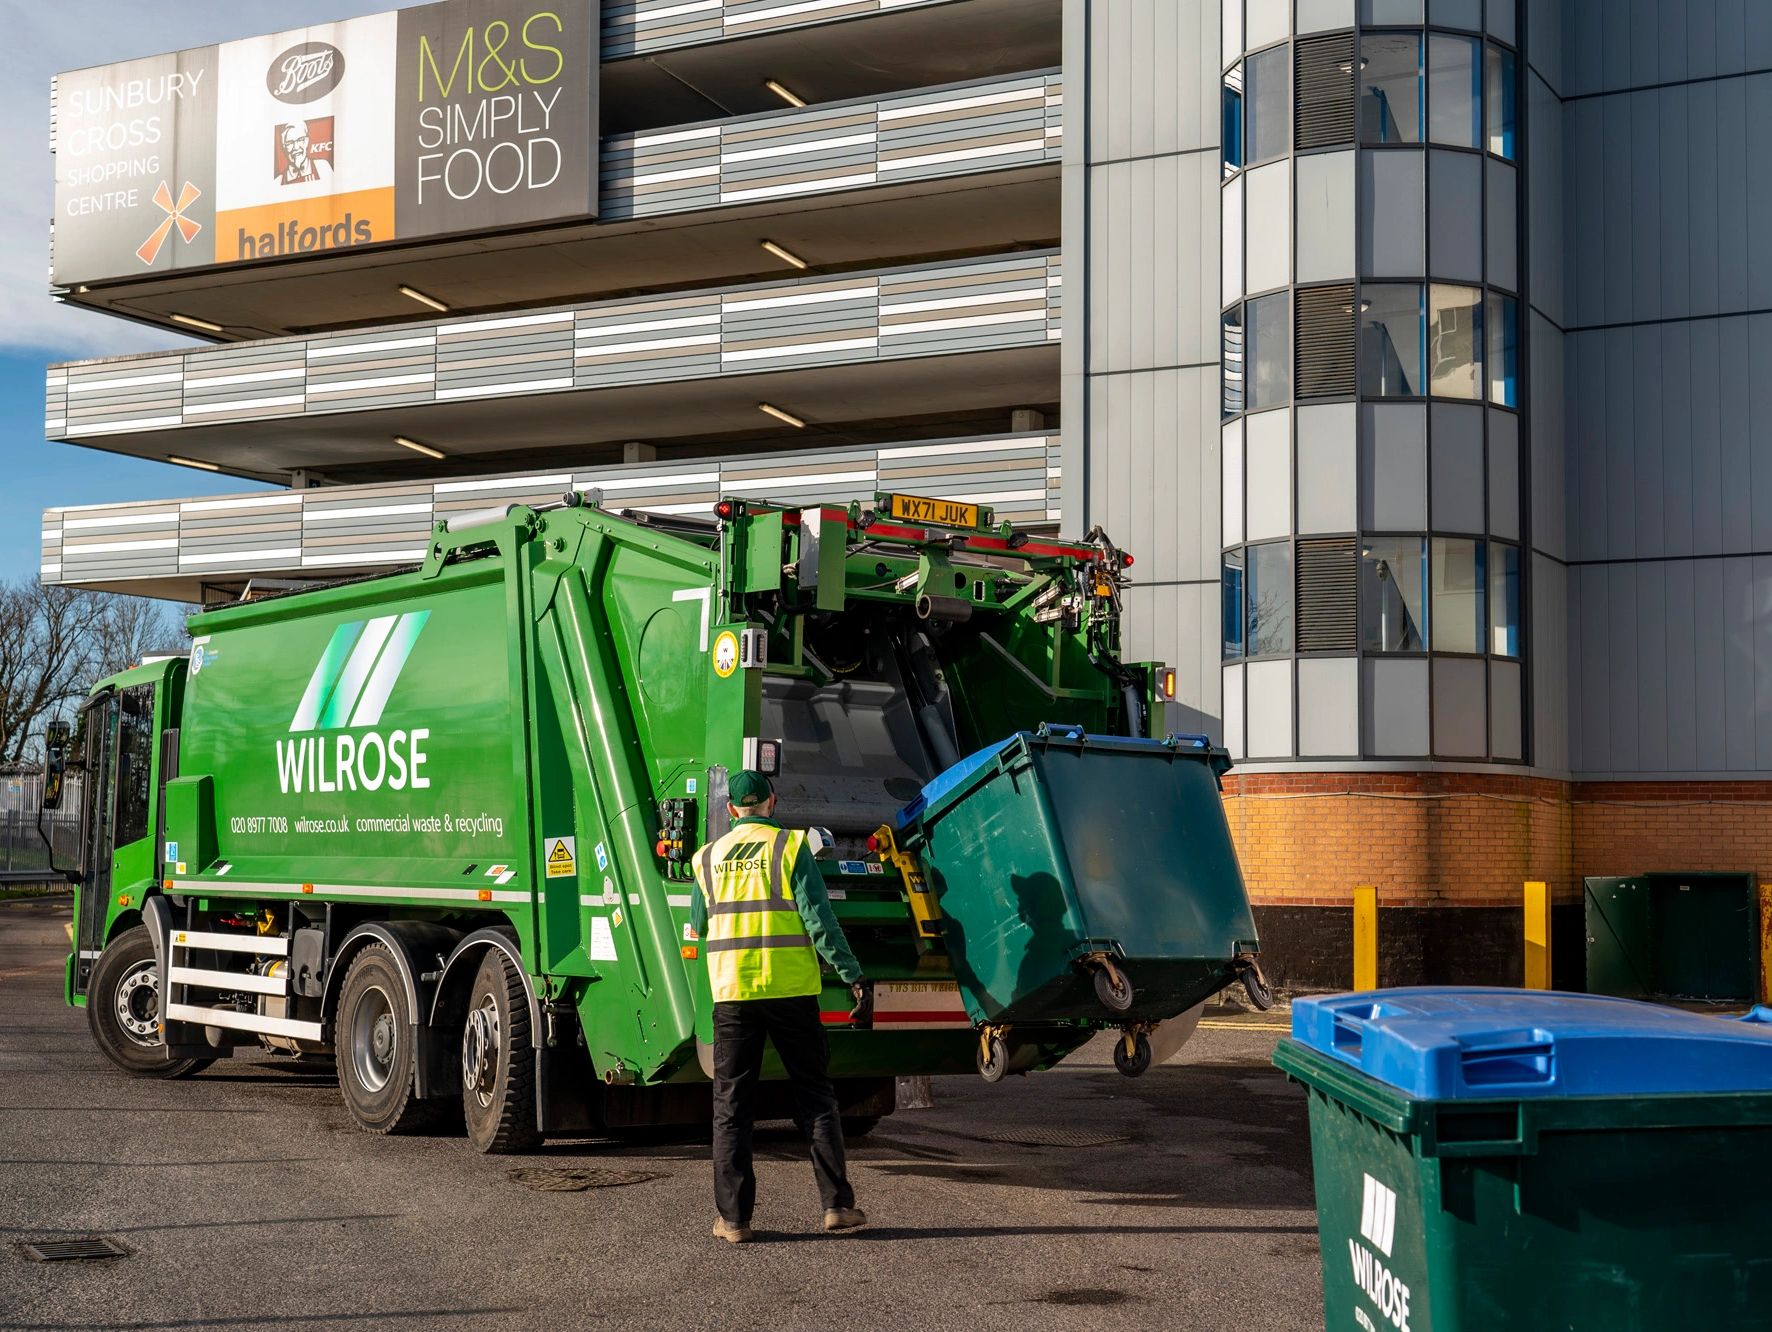 Wilrose dustcart collecting commercial waste in windsor, berkshire.